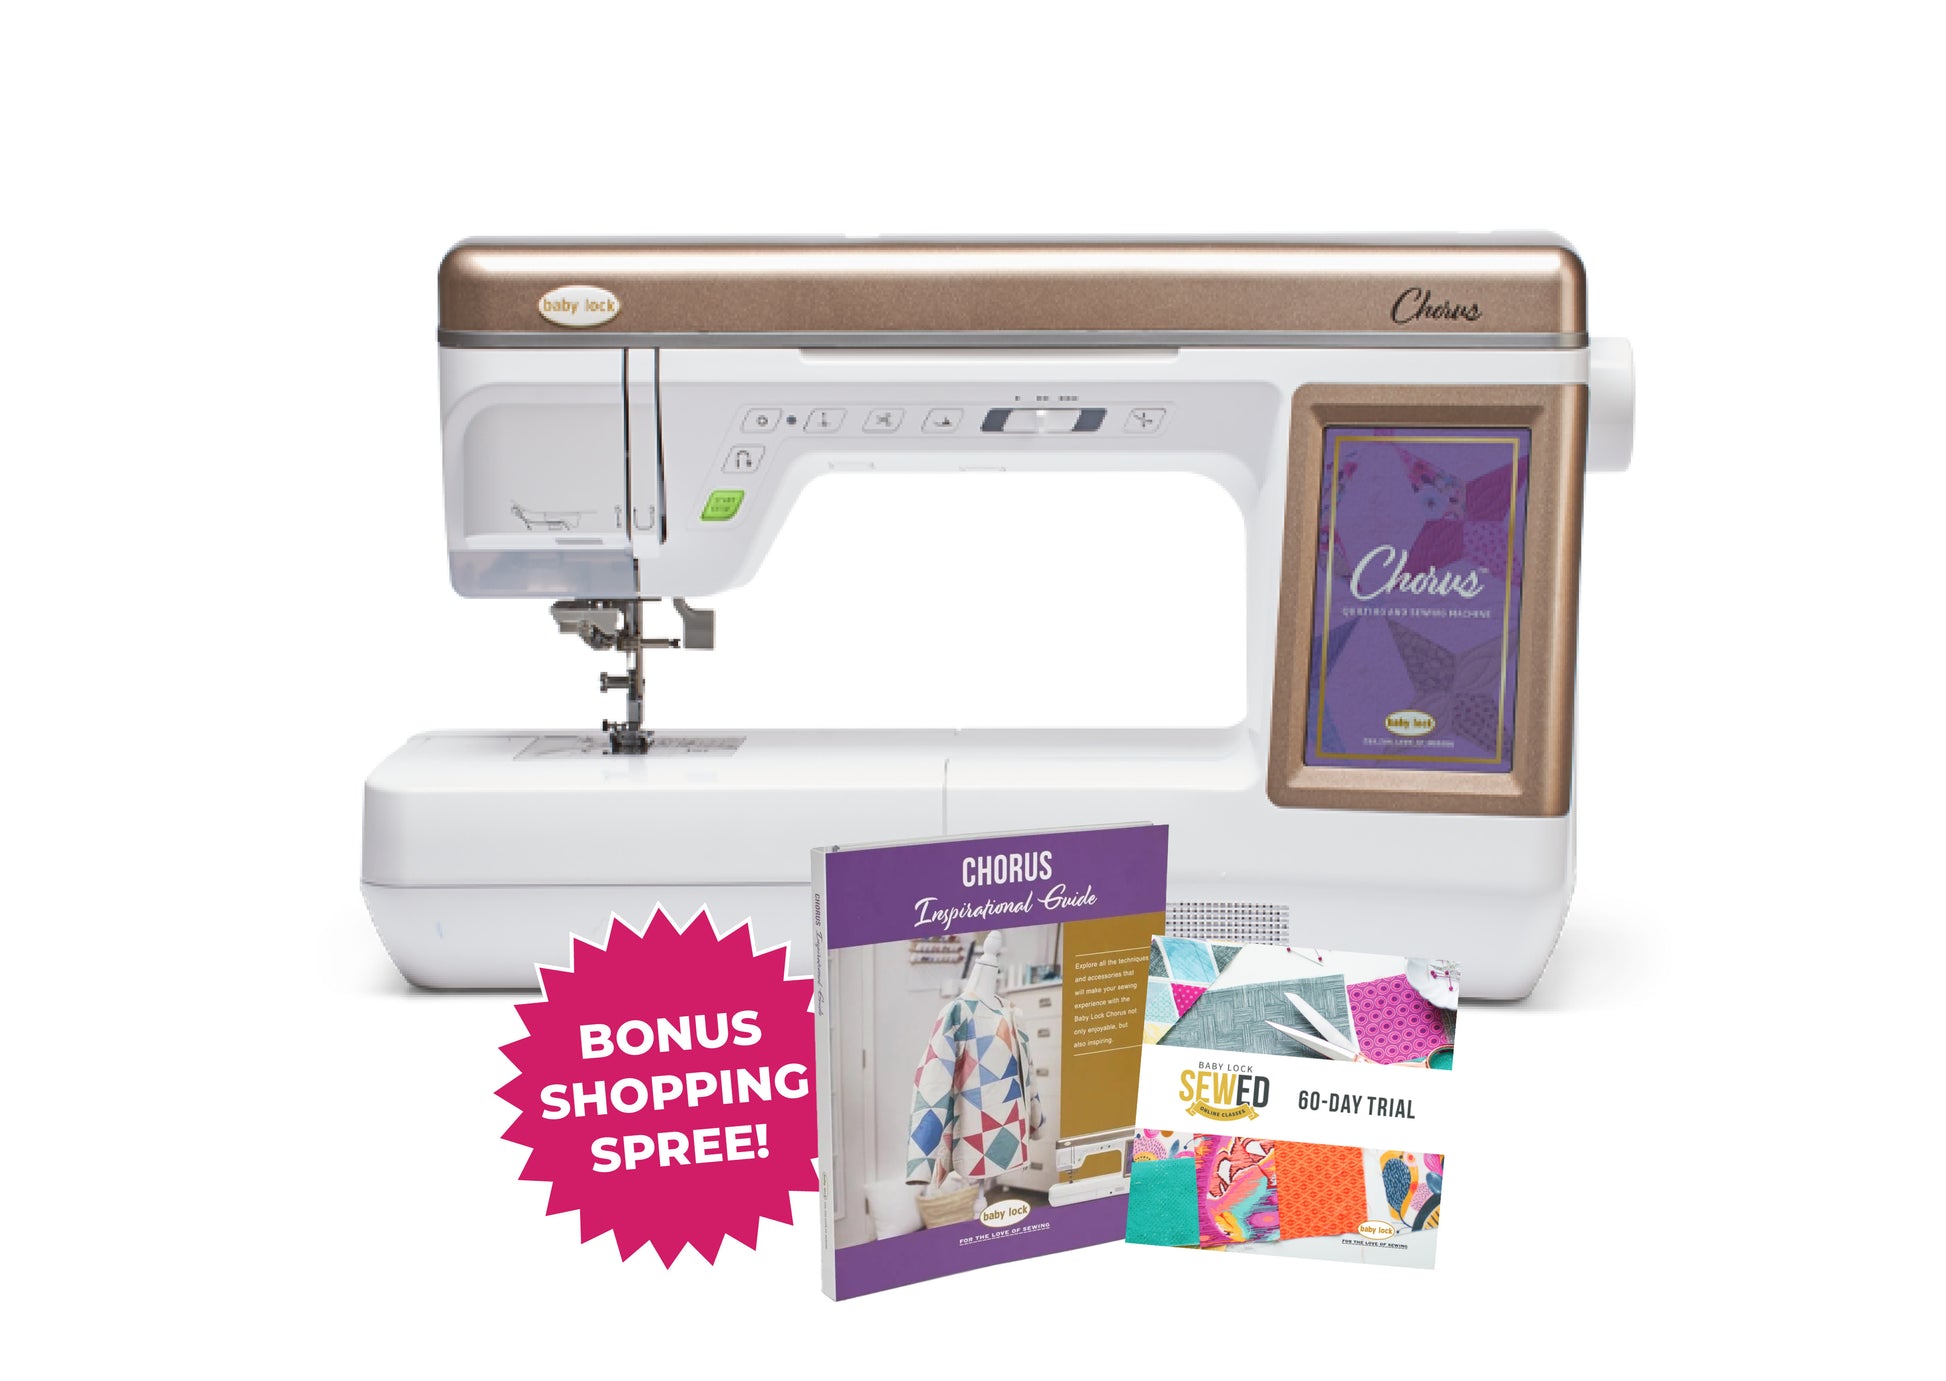 Baby Lock Chorus Sewing & Quilting Machine with Inspirational Guide, Love of Knowledge, Shopping Spree Quality Sewing Bundle